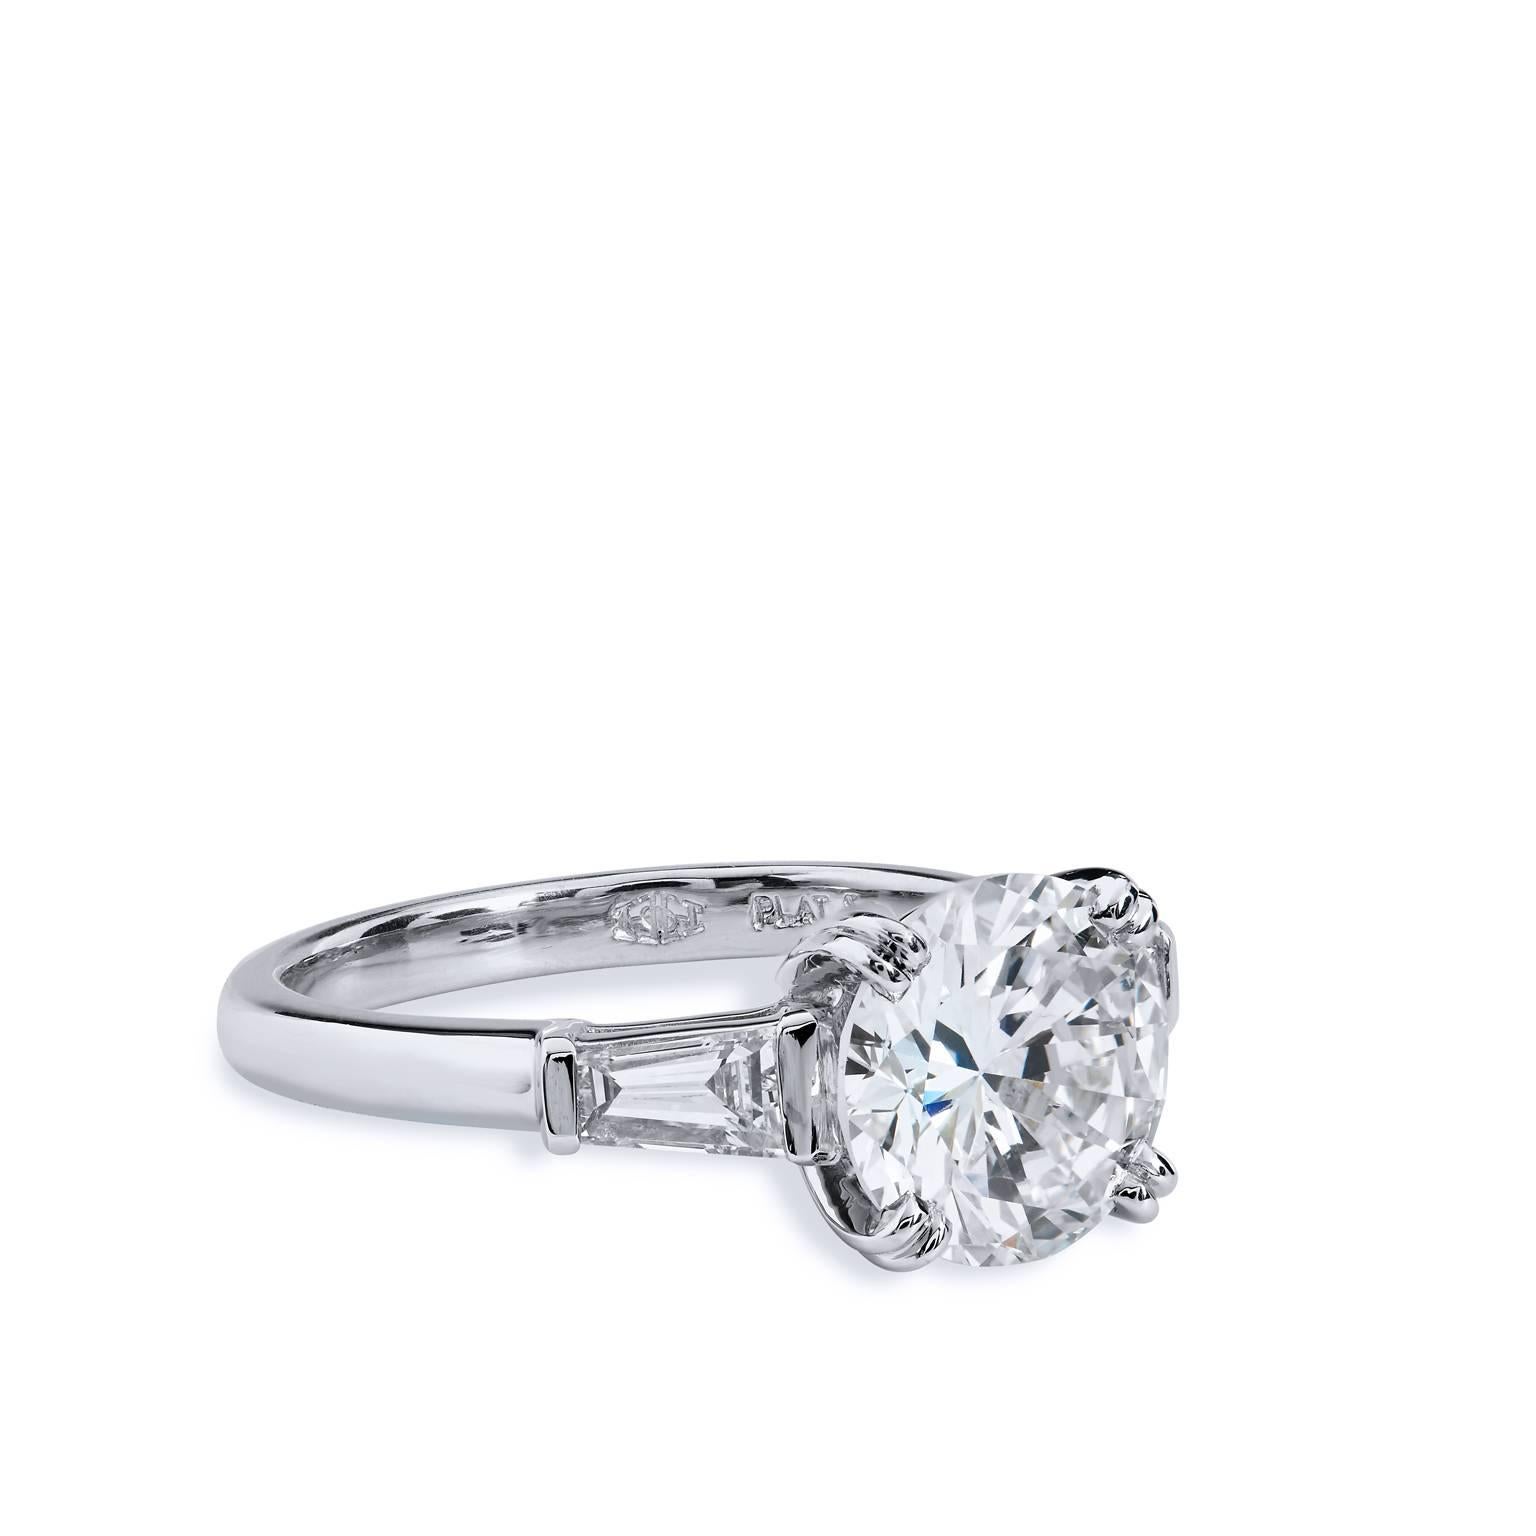 Leave her suspended in a dream with this beautiful H & H, handcrafted platinum and diamond engagement ring. Two tapered baguette diamond side stones weighing a total of 0.32 carat (J/K/VS)draw the eye toward the remarkable 2.22 carat diamond set at